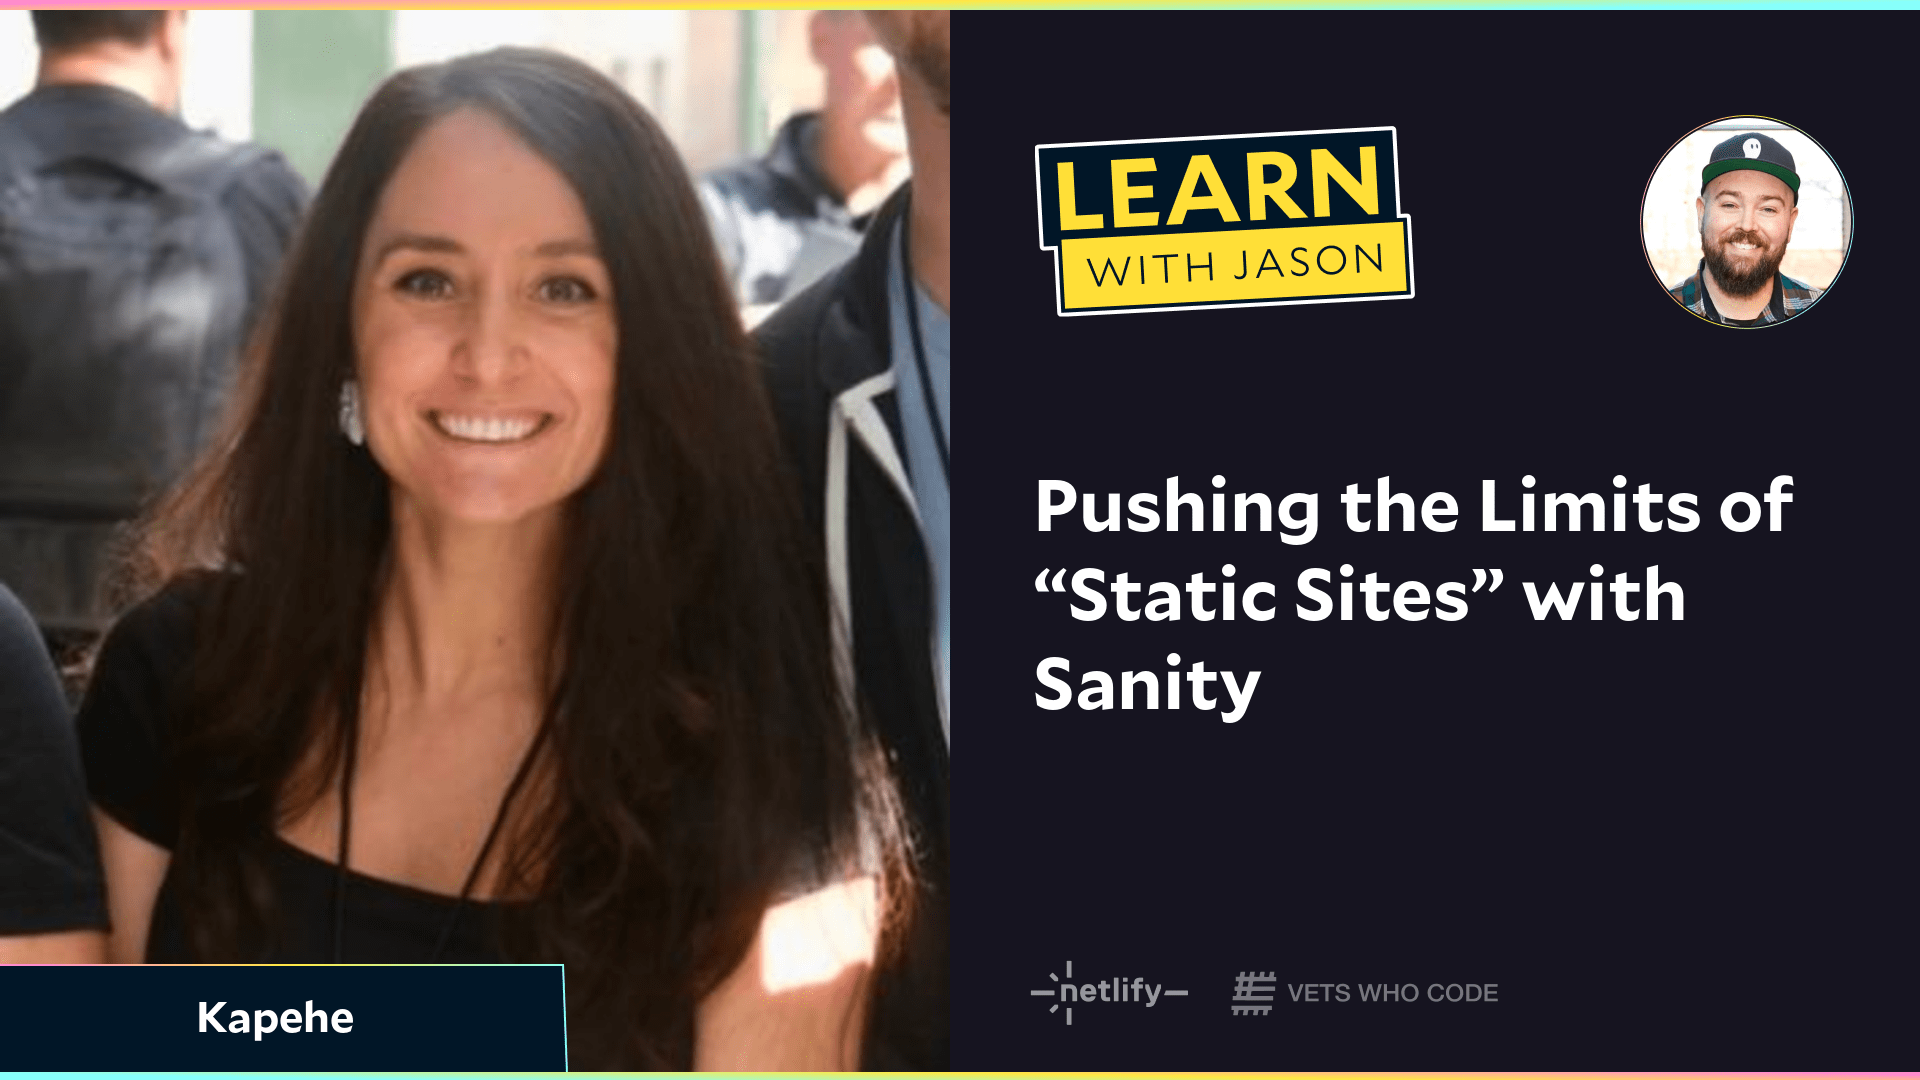 Pushing the Limits of “Static Sites” with Sanity (with Kapehe)